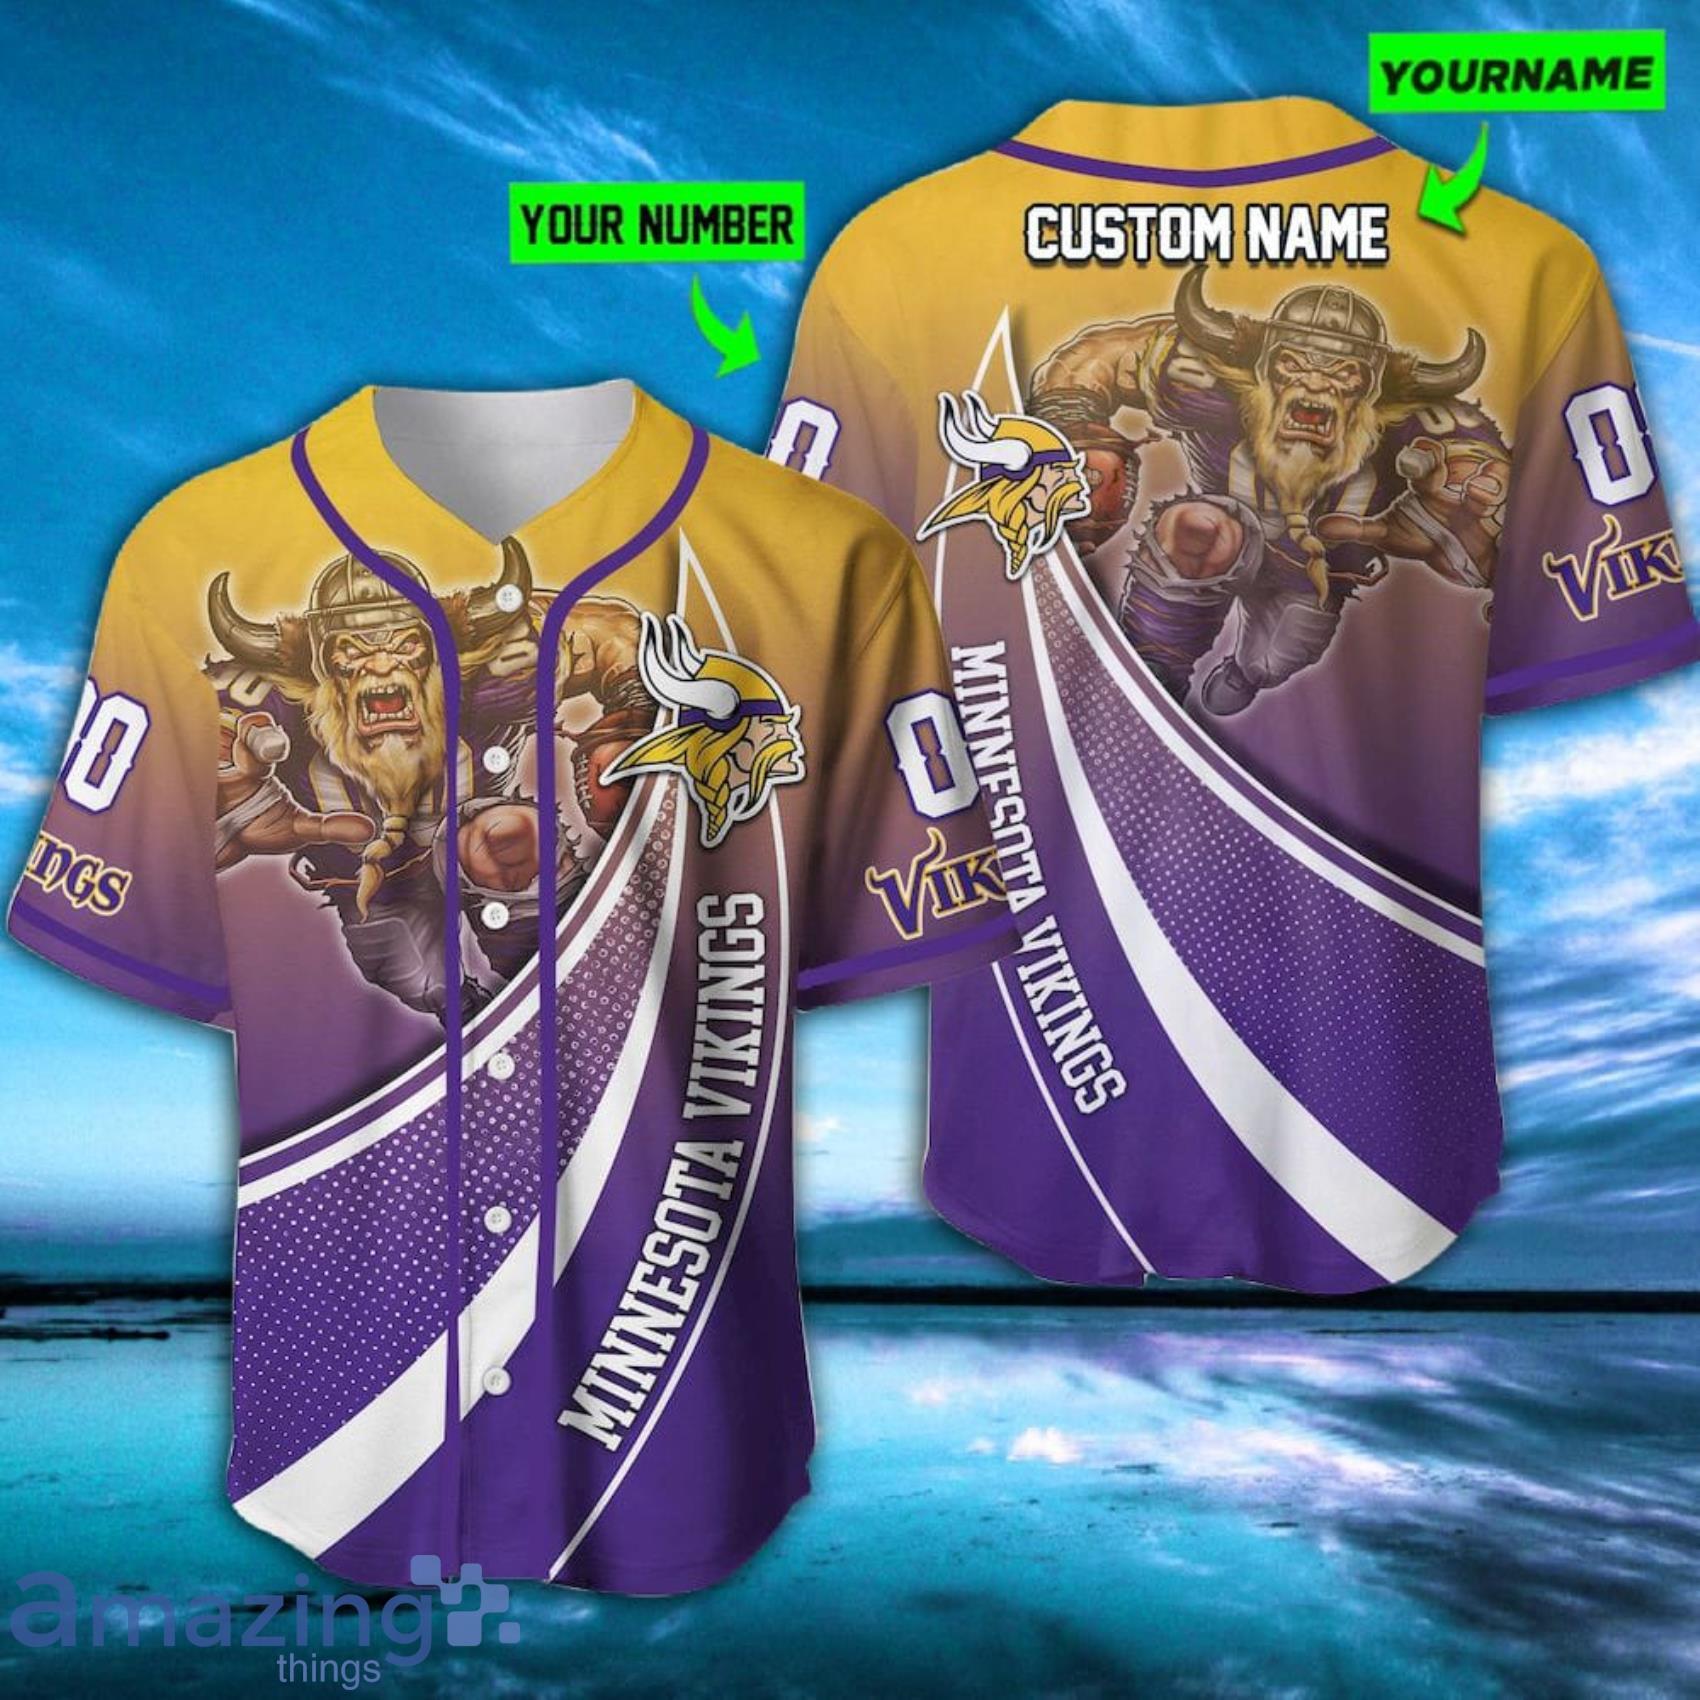 SIGNATURE Sublimated Full Button Jersey Design 28